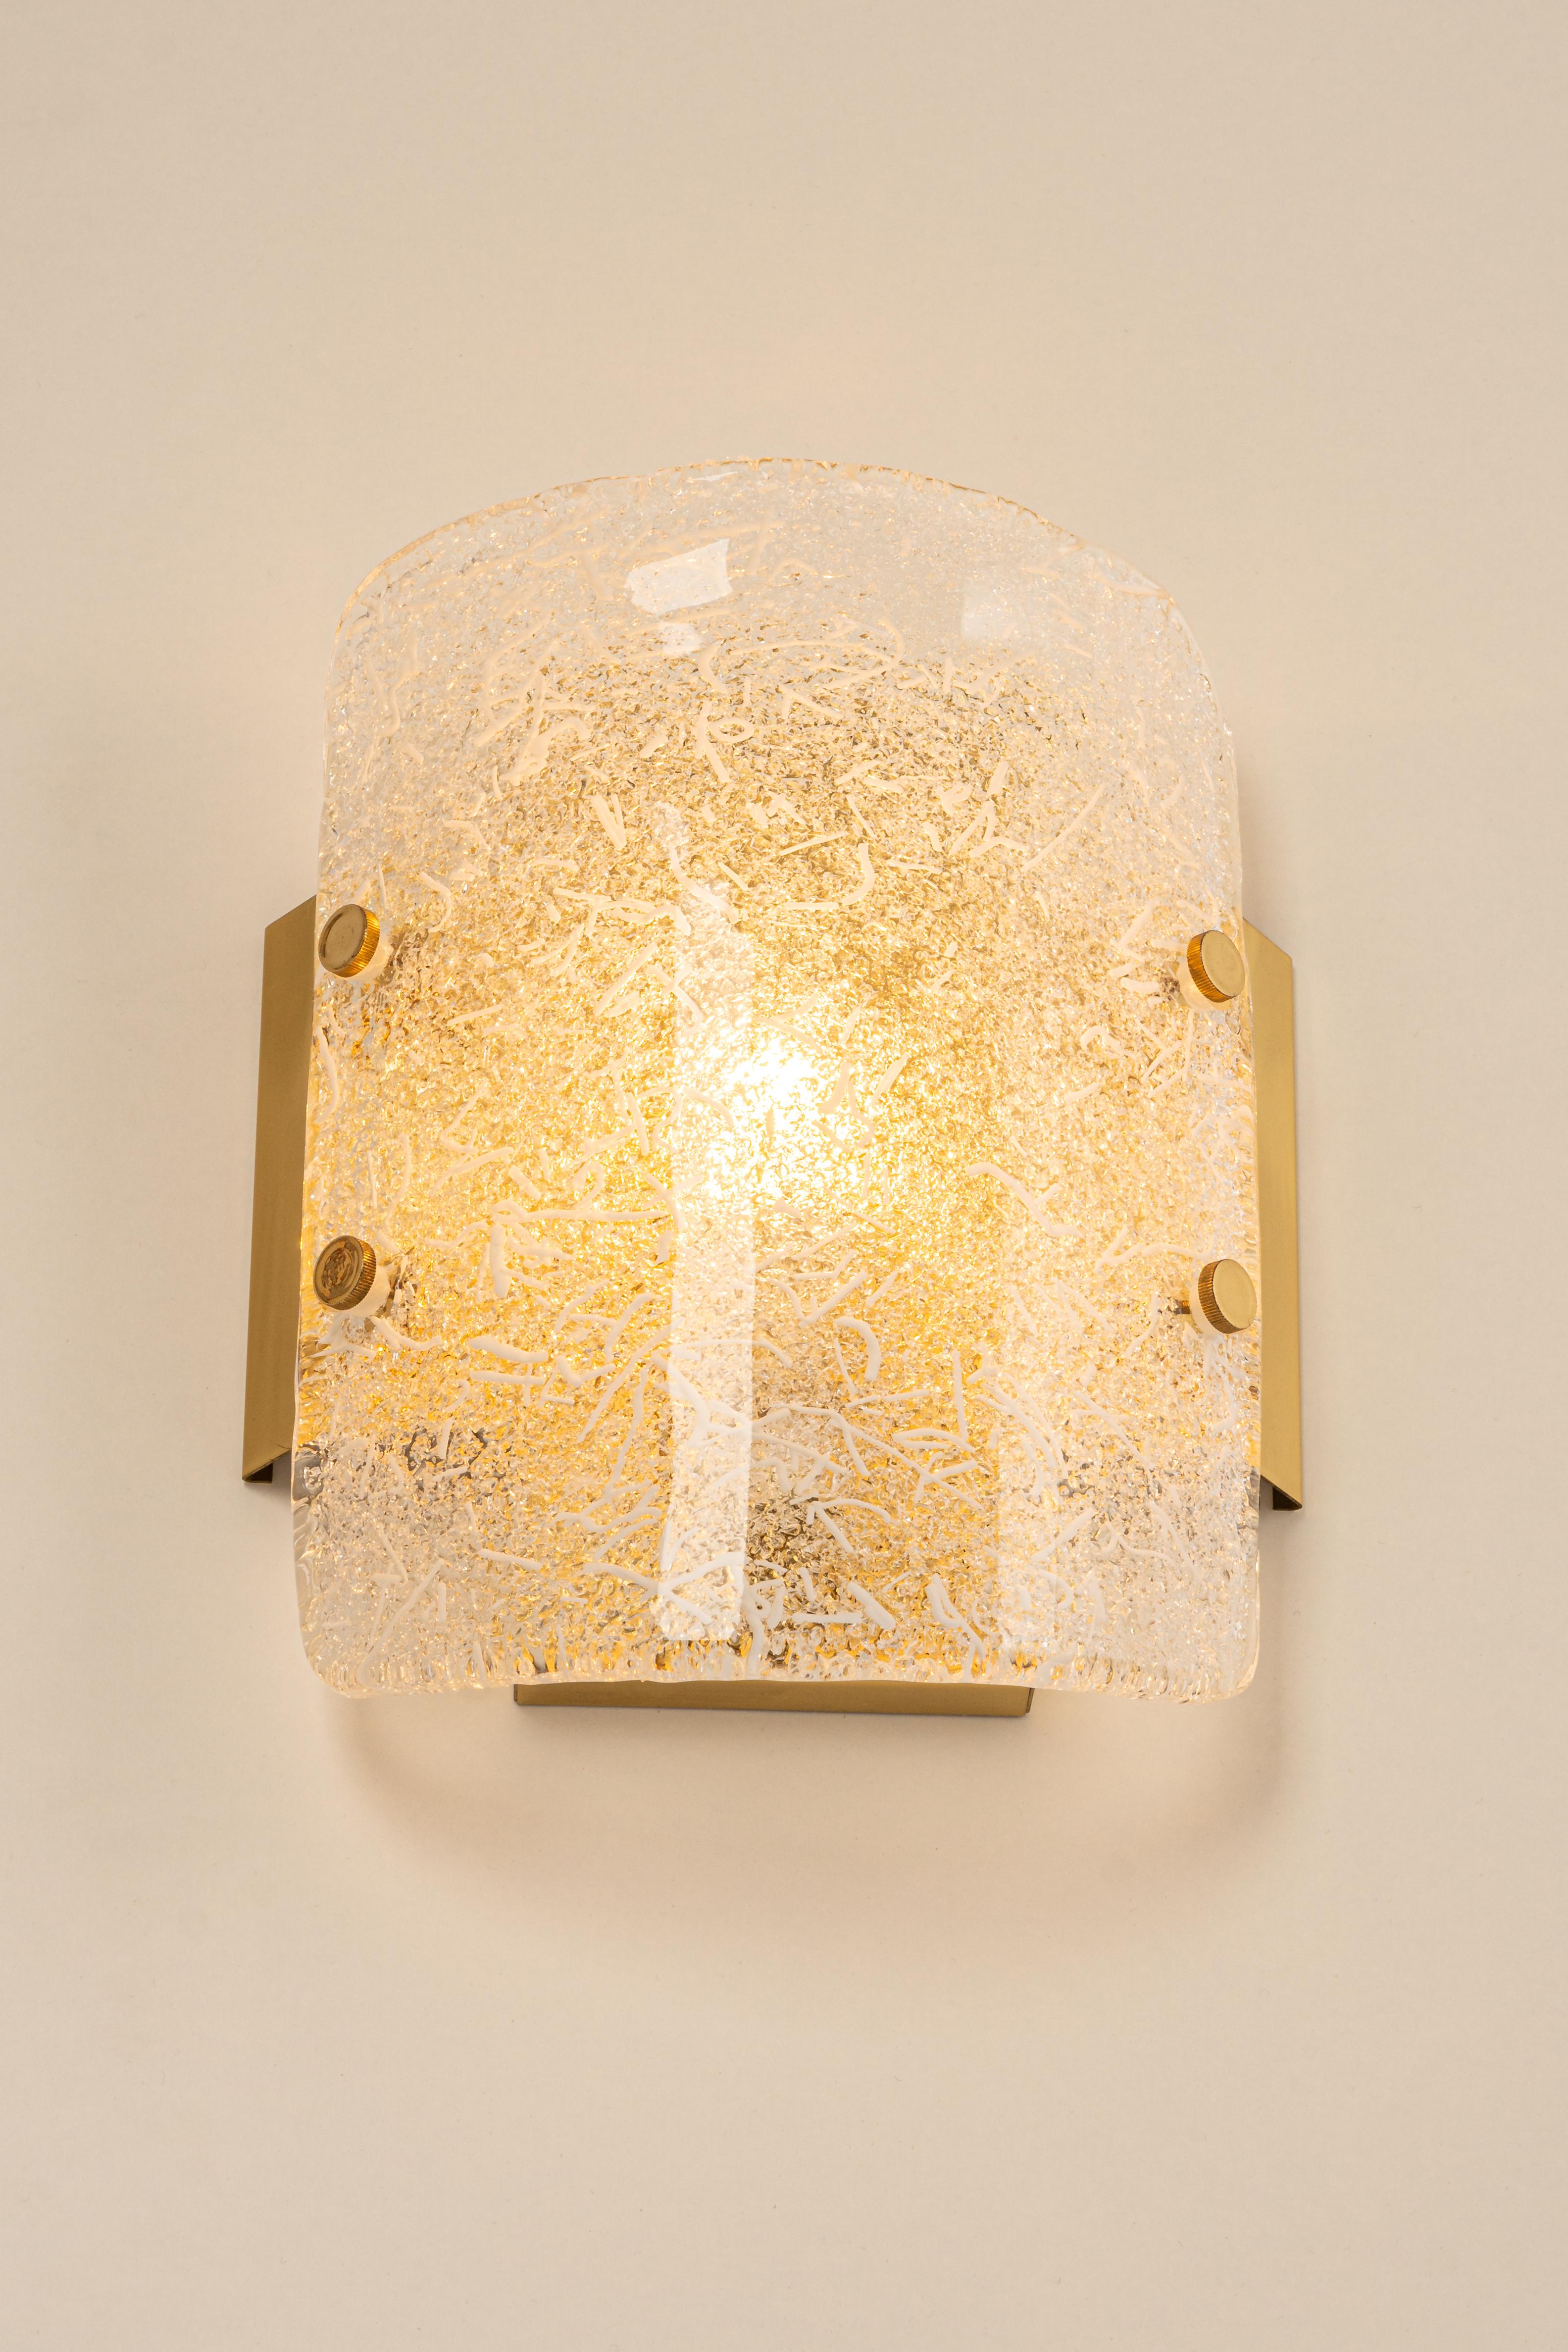 Brass Pair of Murano Glass Wall Sconces by Hillebrand, Germany, 1970s For Sale